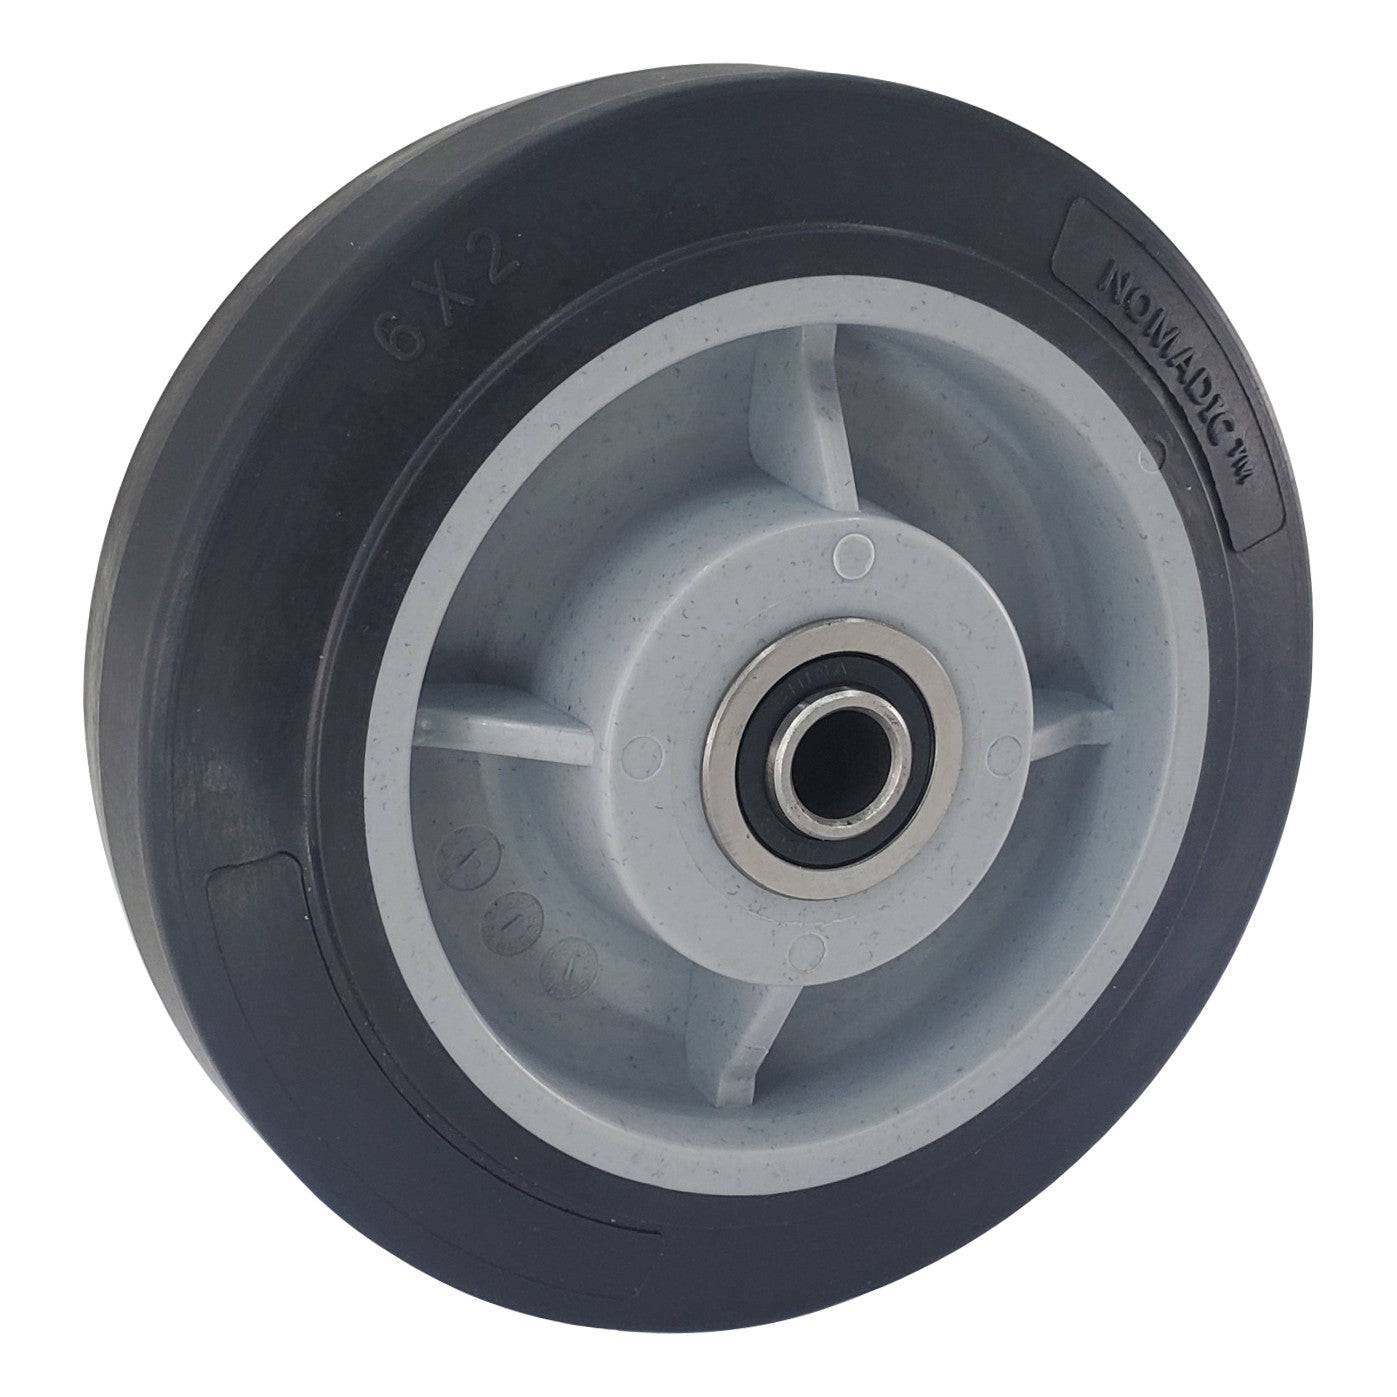 6" x 2" Nomadic Wheel - 600 lbs. capacity - Durable Superior Casters